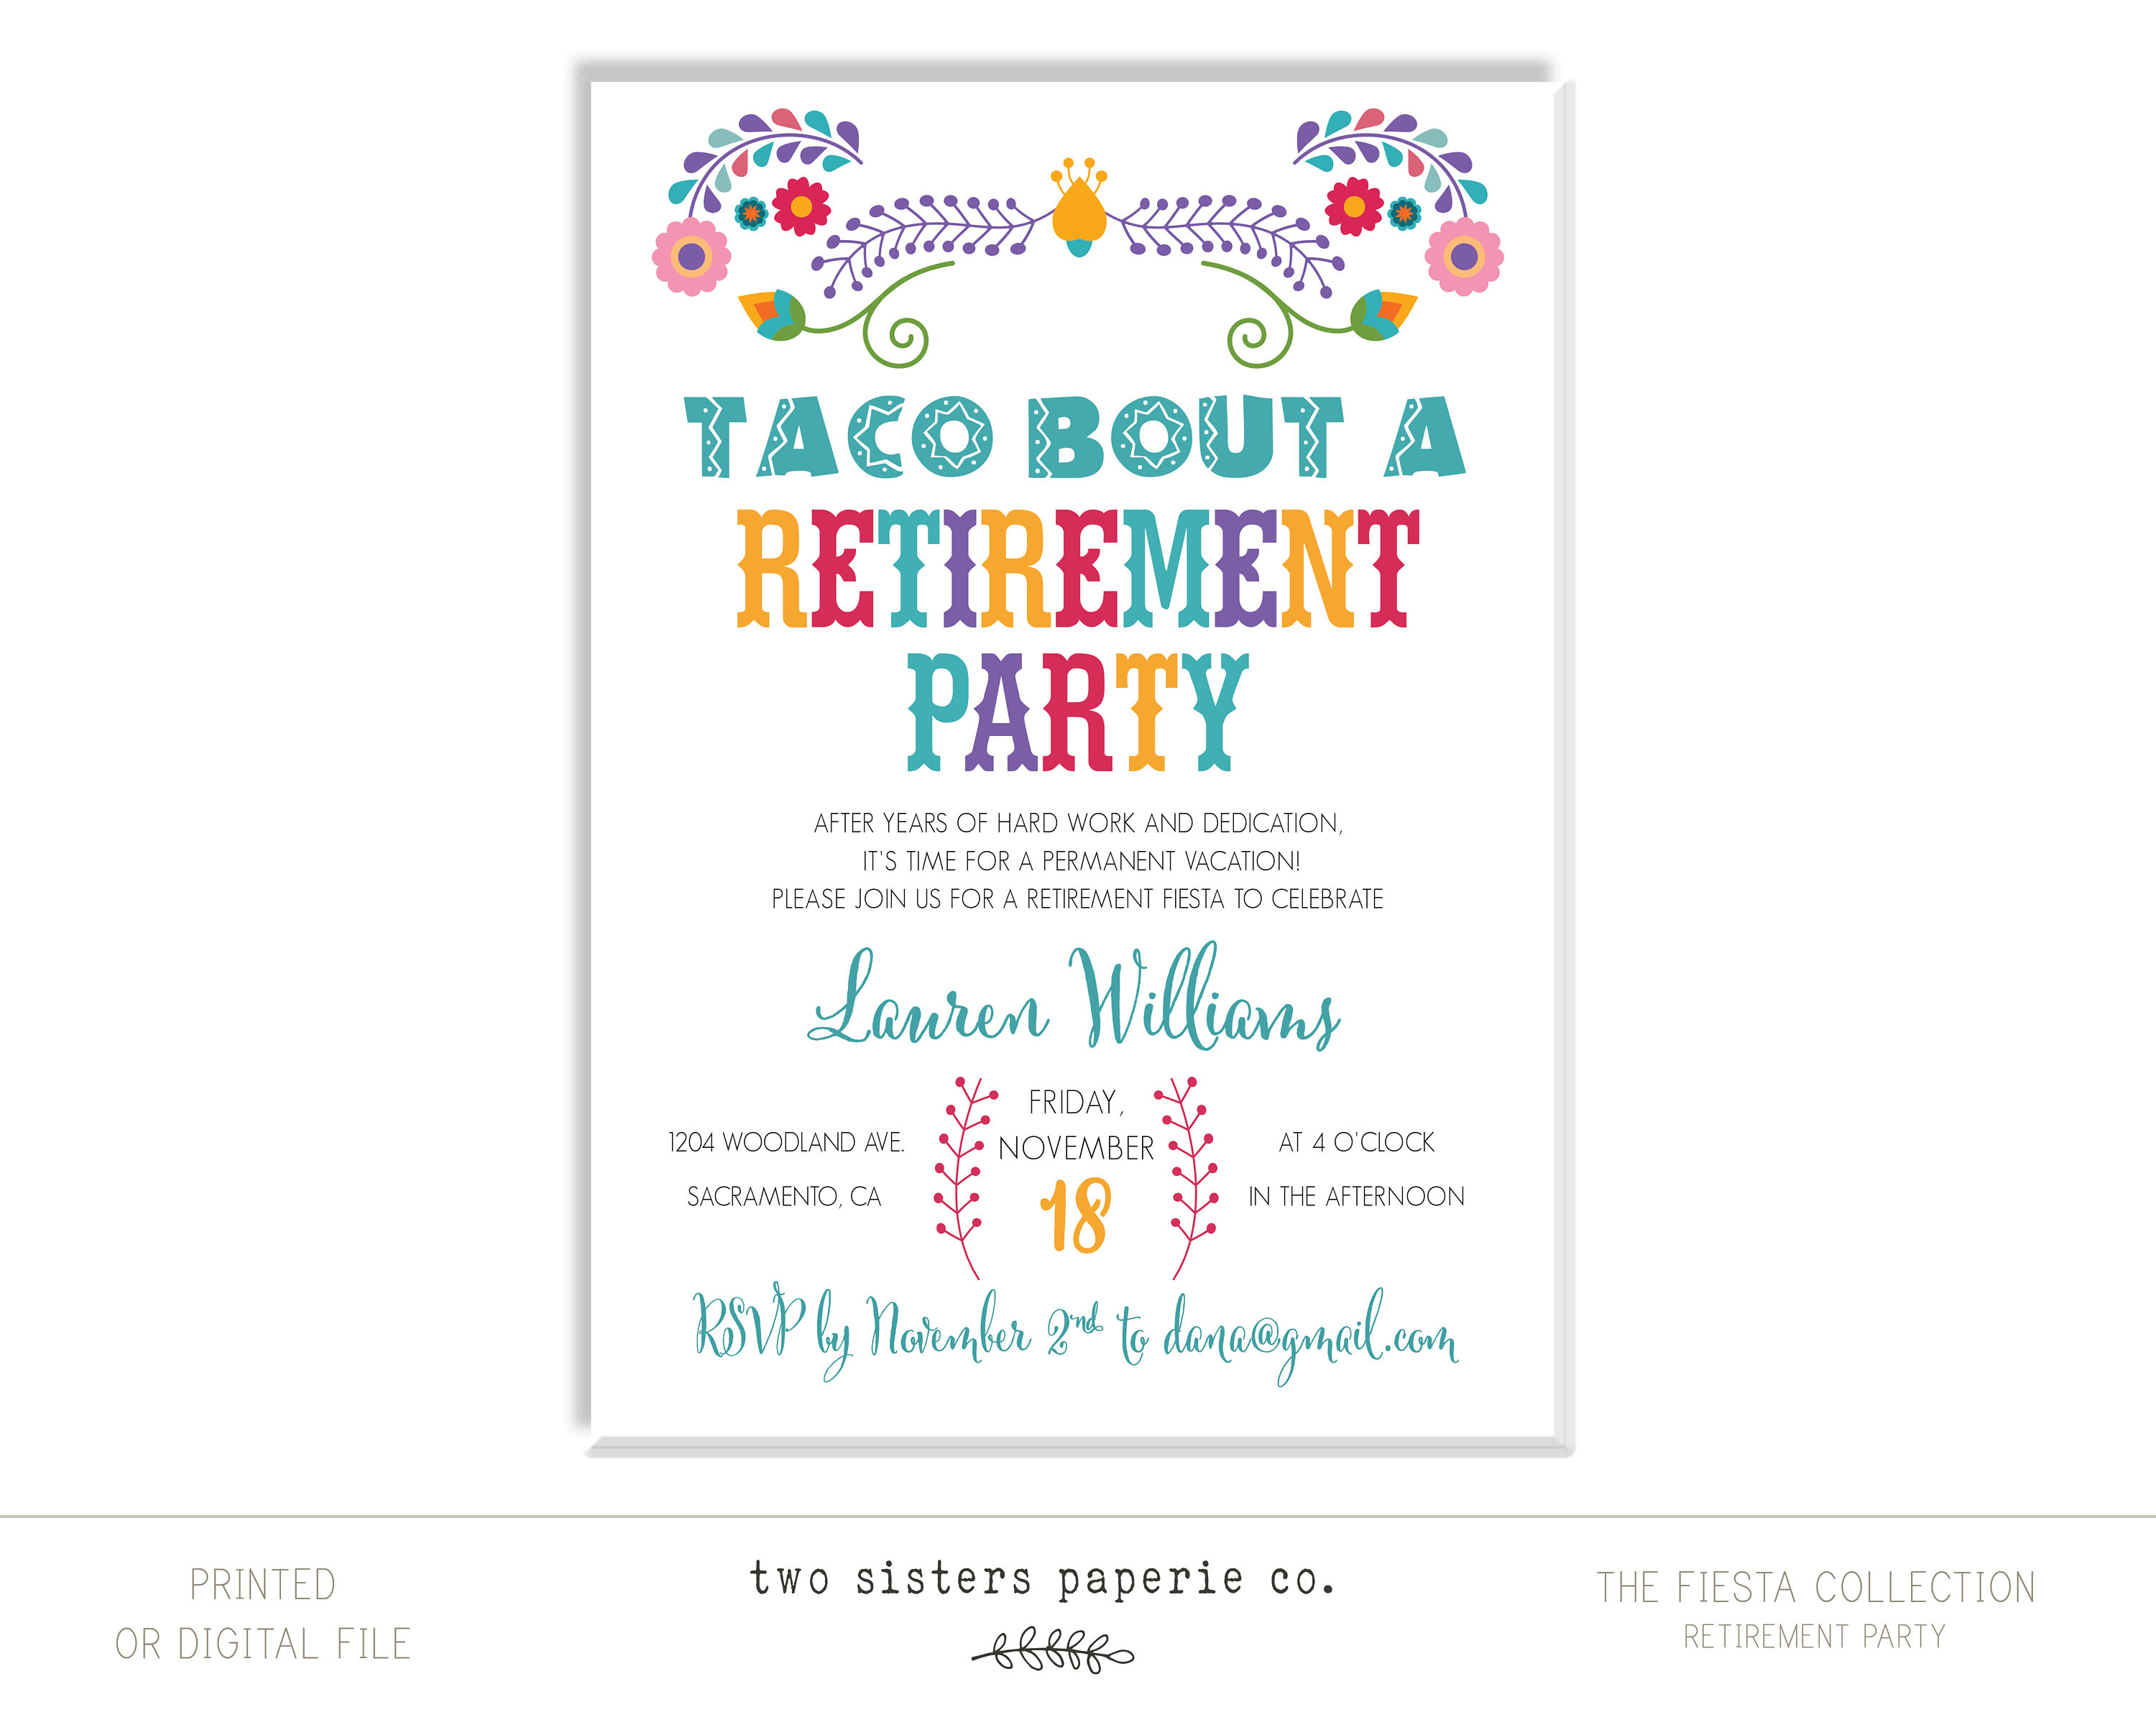 Taco Bout A Retirement Party Invitation Fiesta Collection | Etsy - Printable Dropdown Puzzles